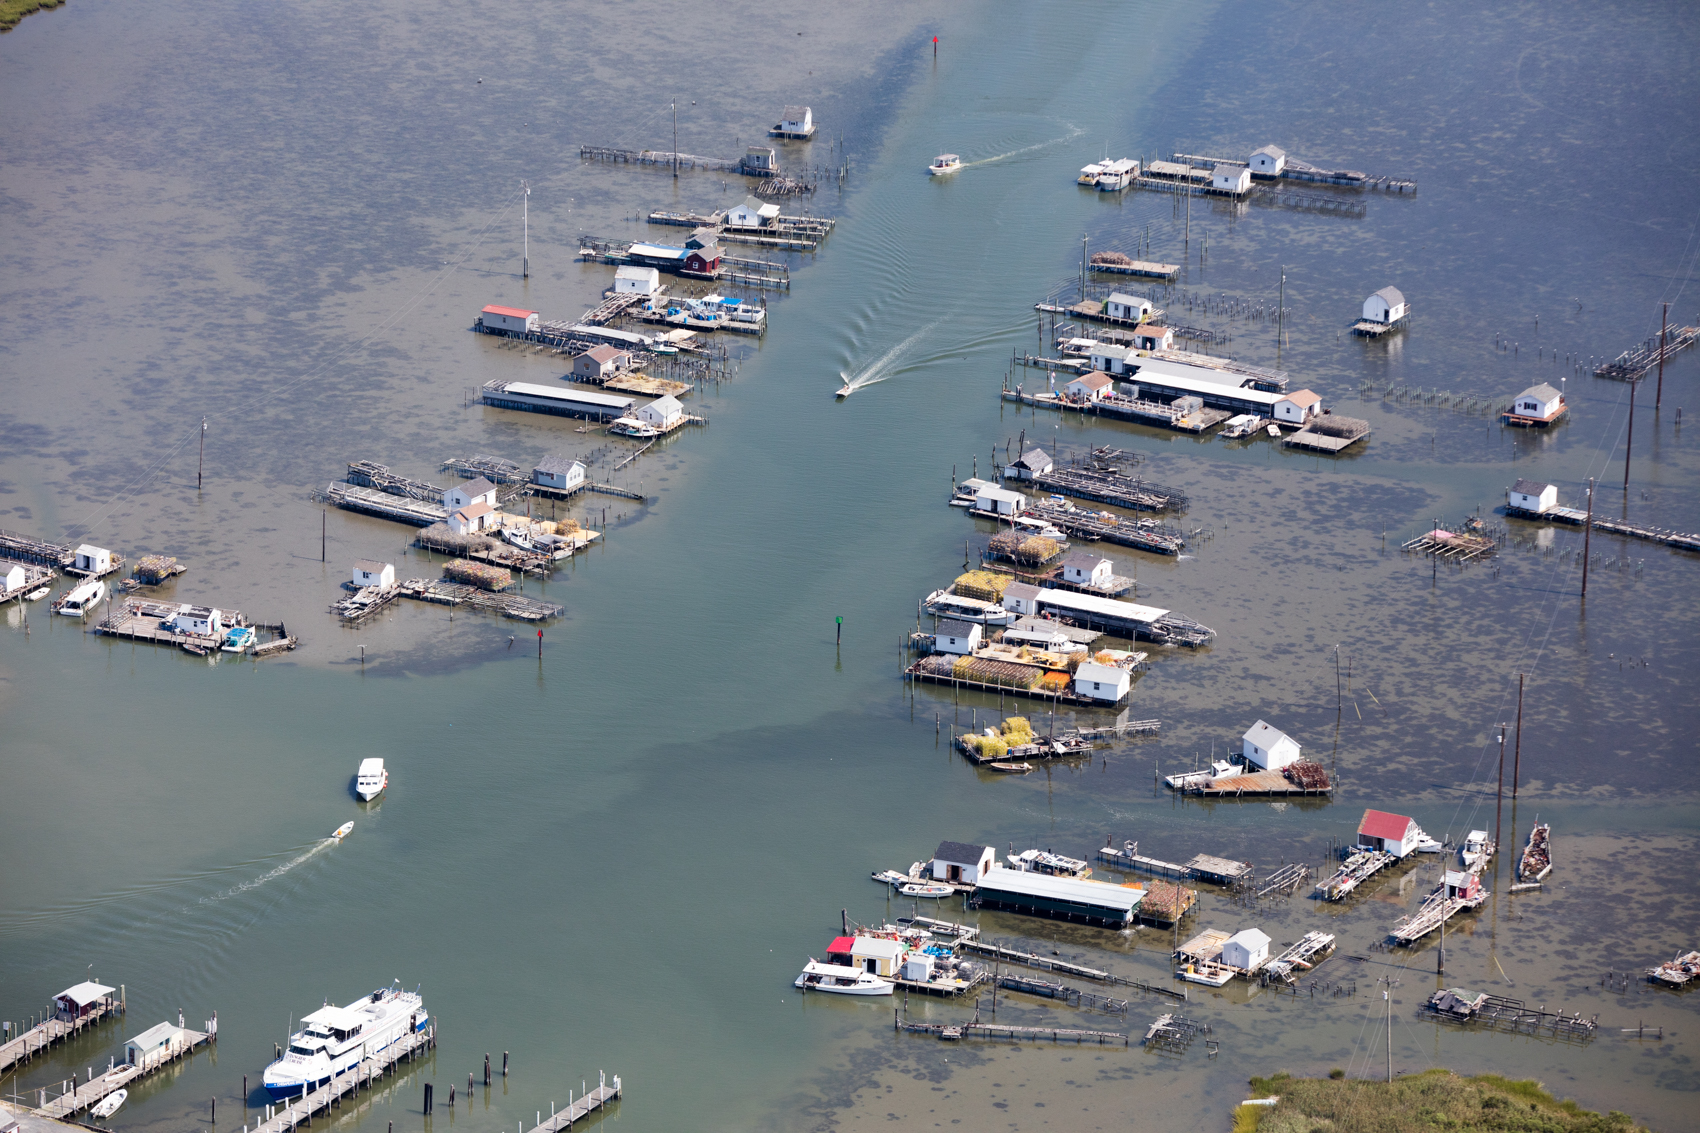 Docks and boat sheds line the canal coming into the town in Tangier, Virginia. The island, located at the mouth of the Chesapeake Bay, is predicted to be uninhabitable in the next 30 years due to a combination of sea level rise and subsidence.